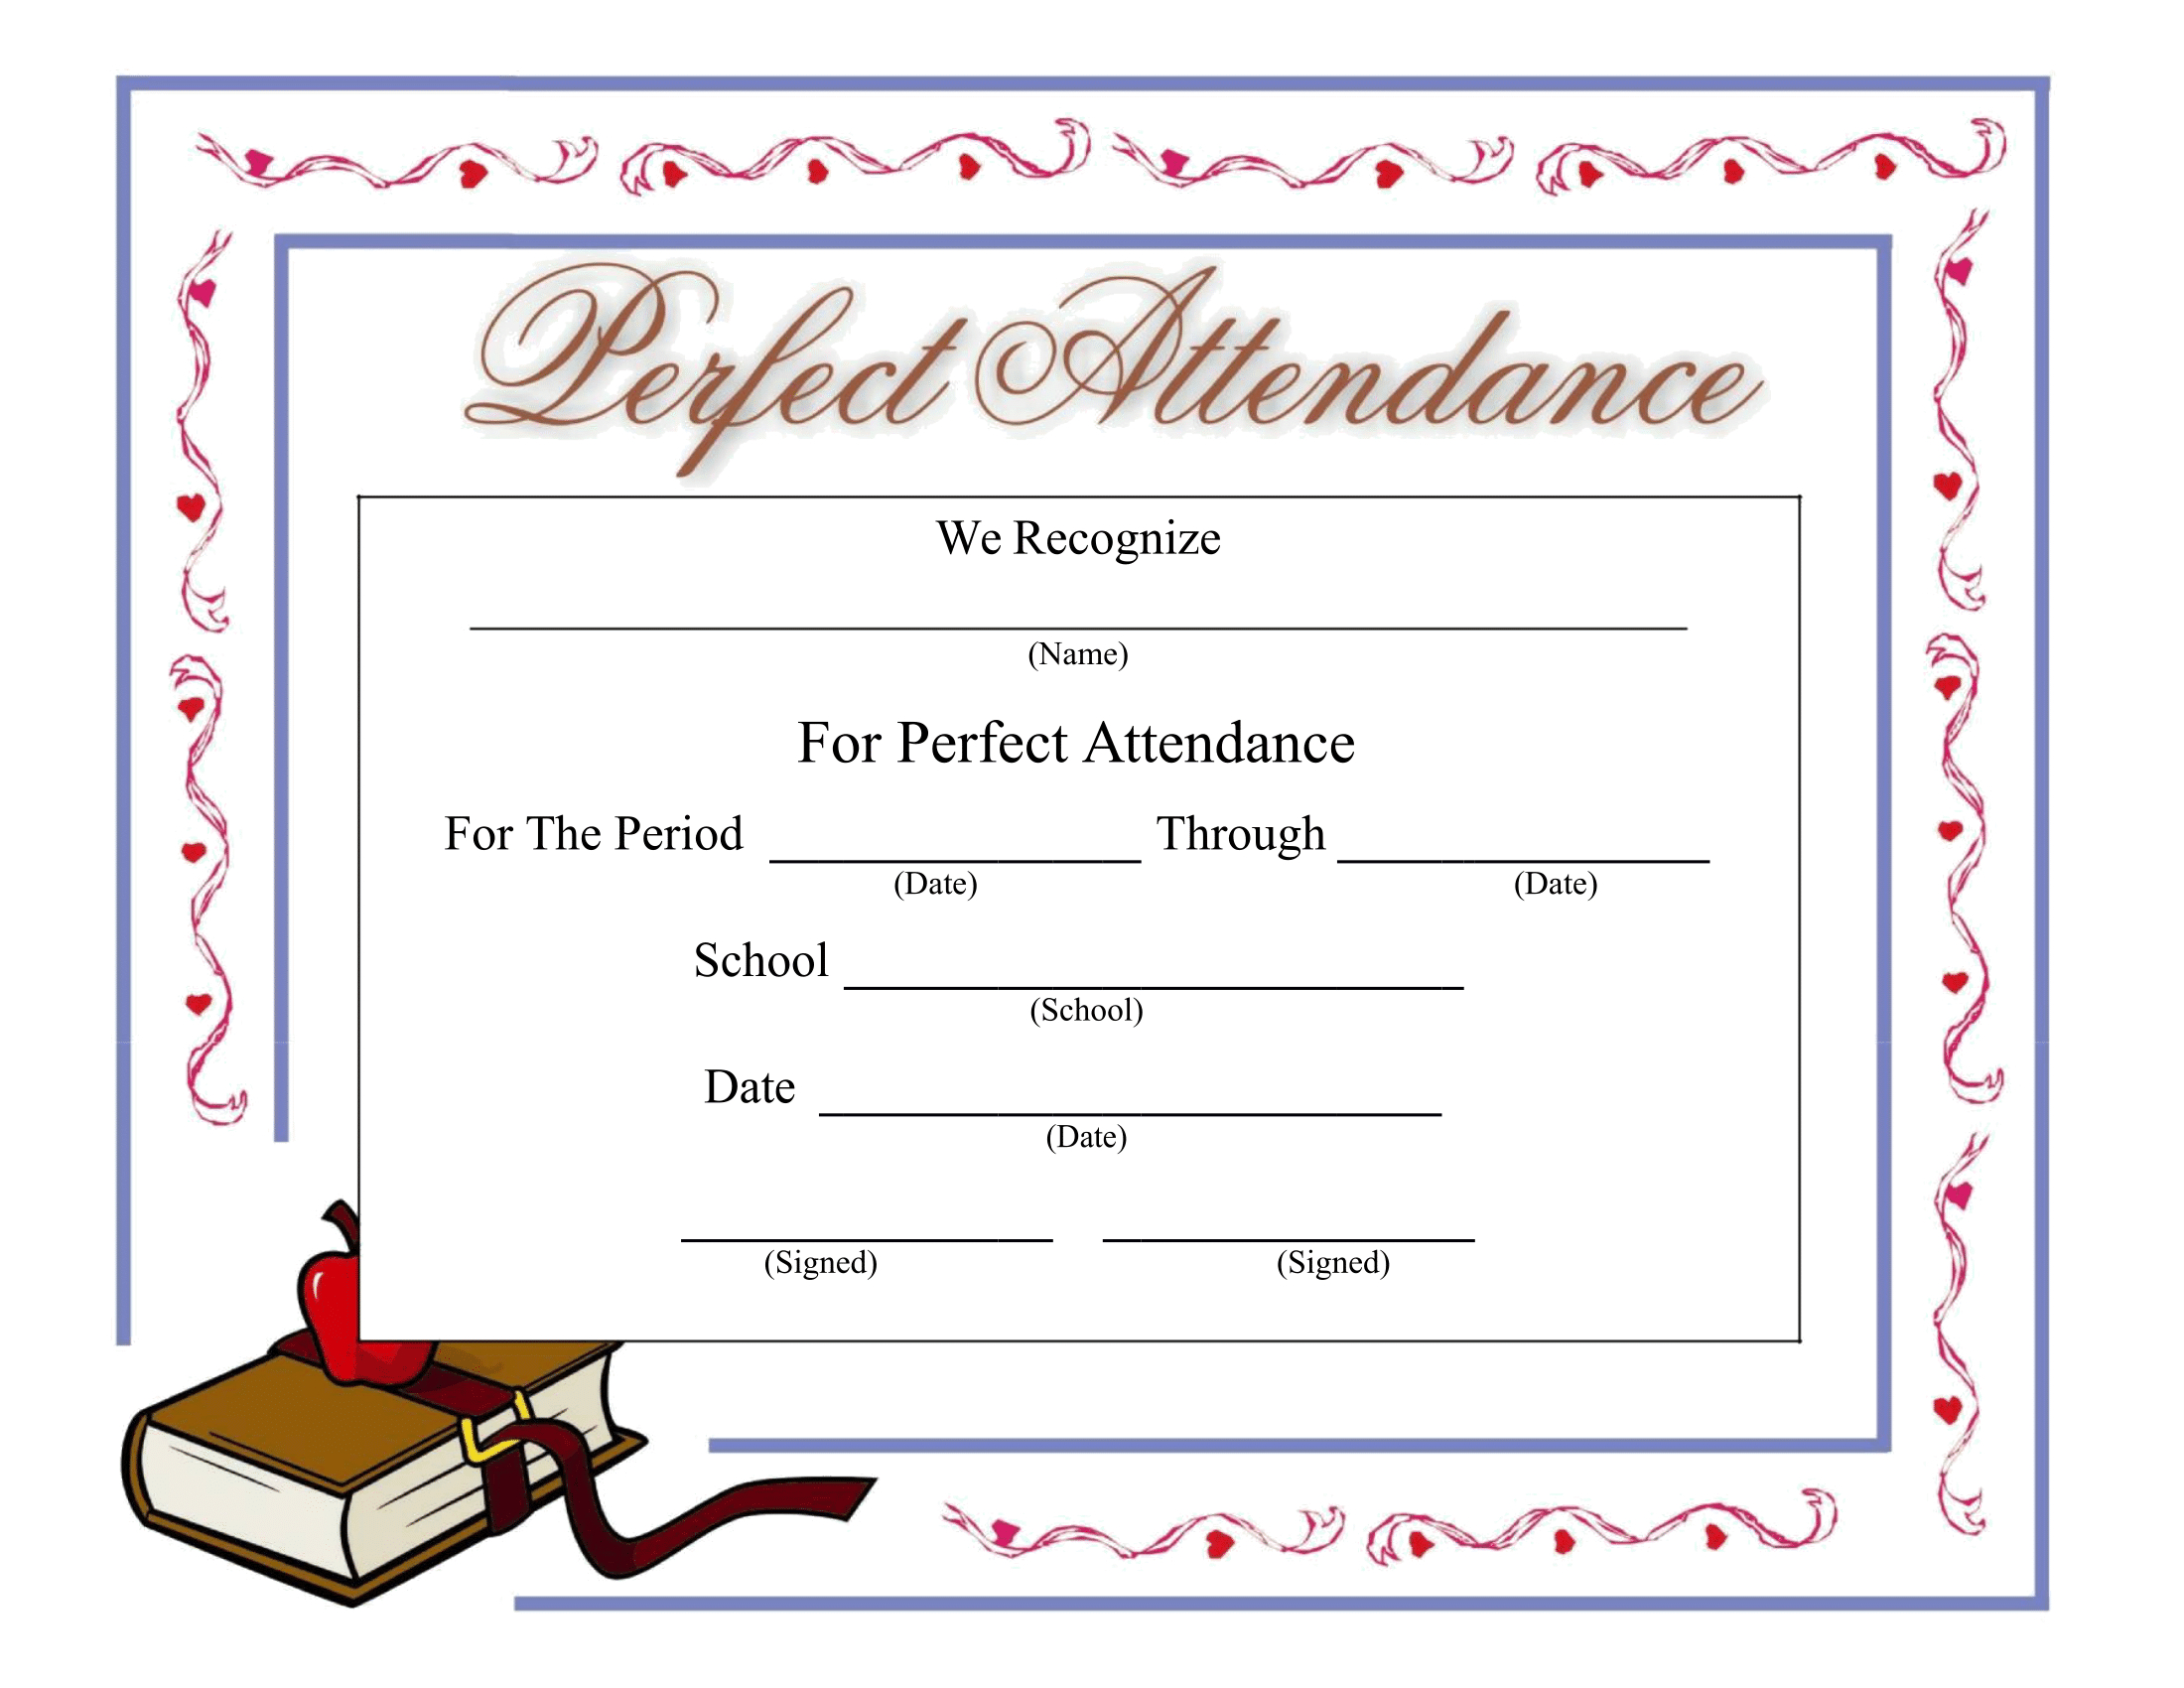 Perfect Attendance Certificate - Download A Free Template Pertaining To Perfect Attendance Certificate Template